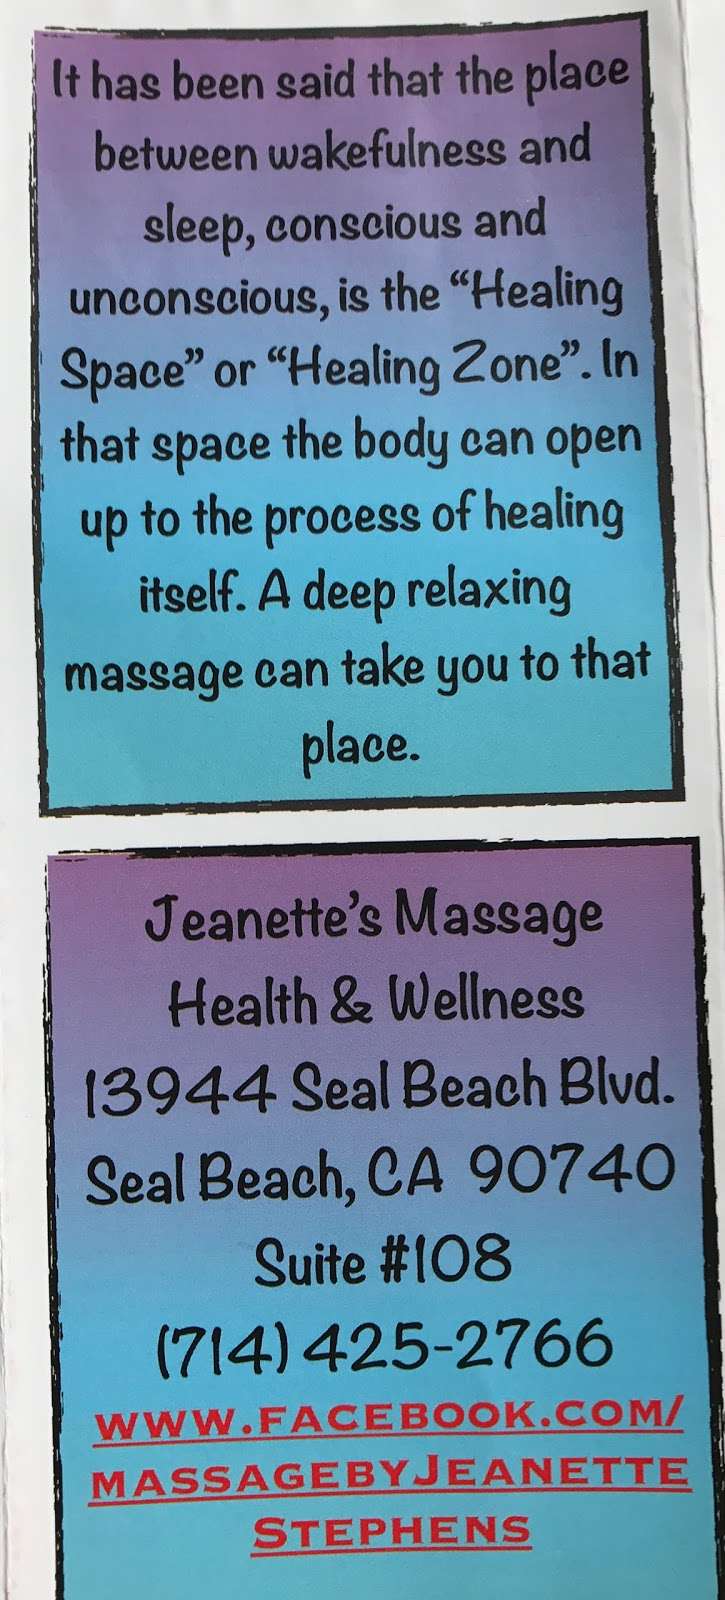 Jeanettes Massage Health and Wellness | s, 13944 Seal Beach Blvd suite #108, Seal Beach, CA 90740 | Phone: (714) 425-2766